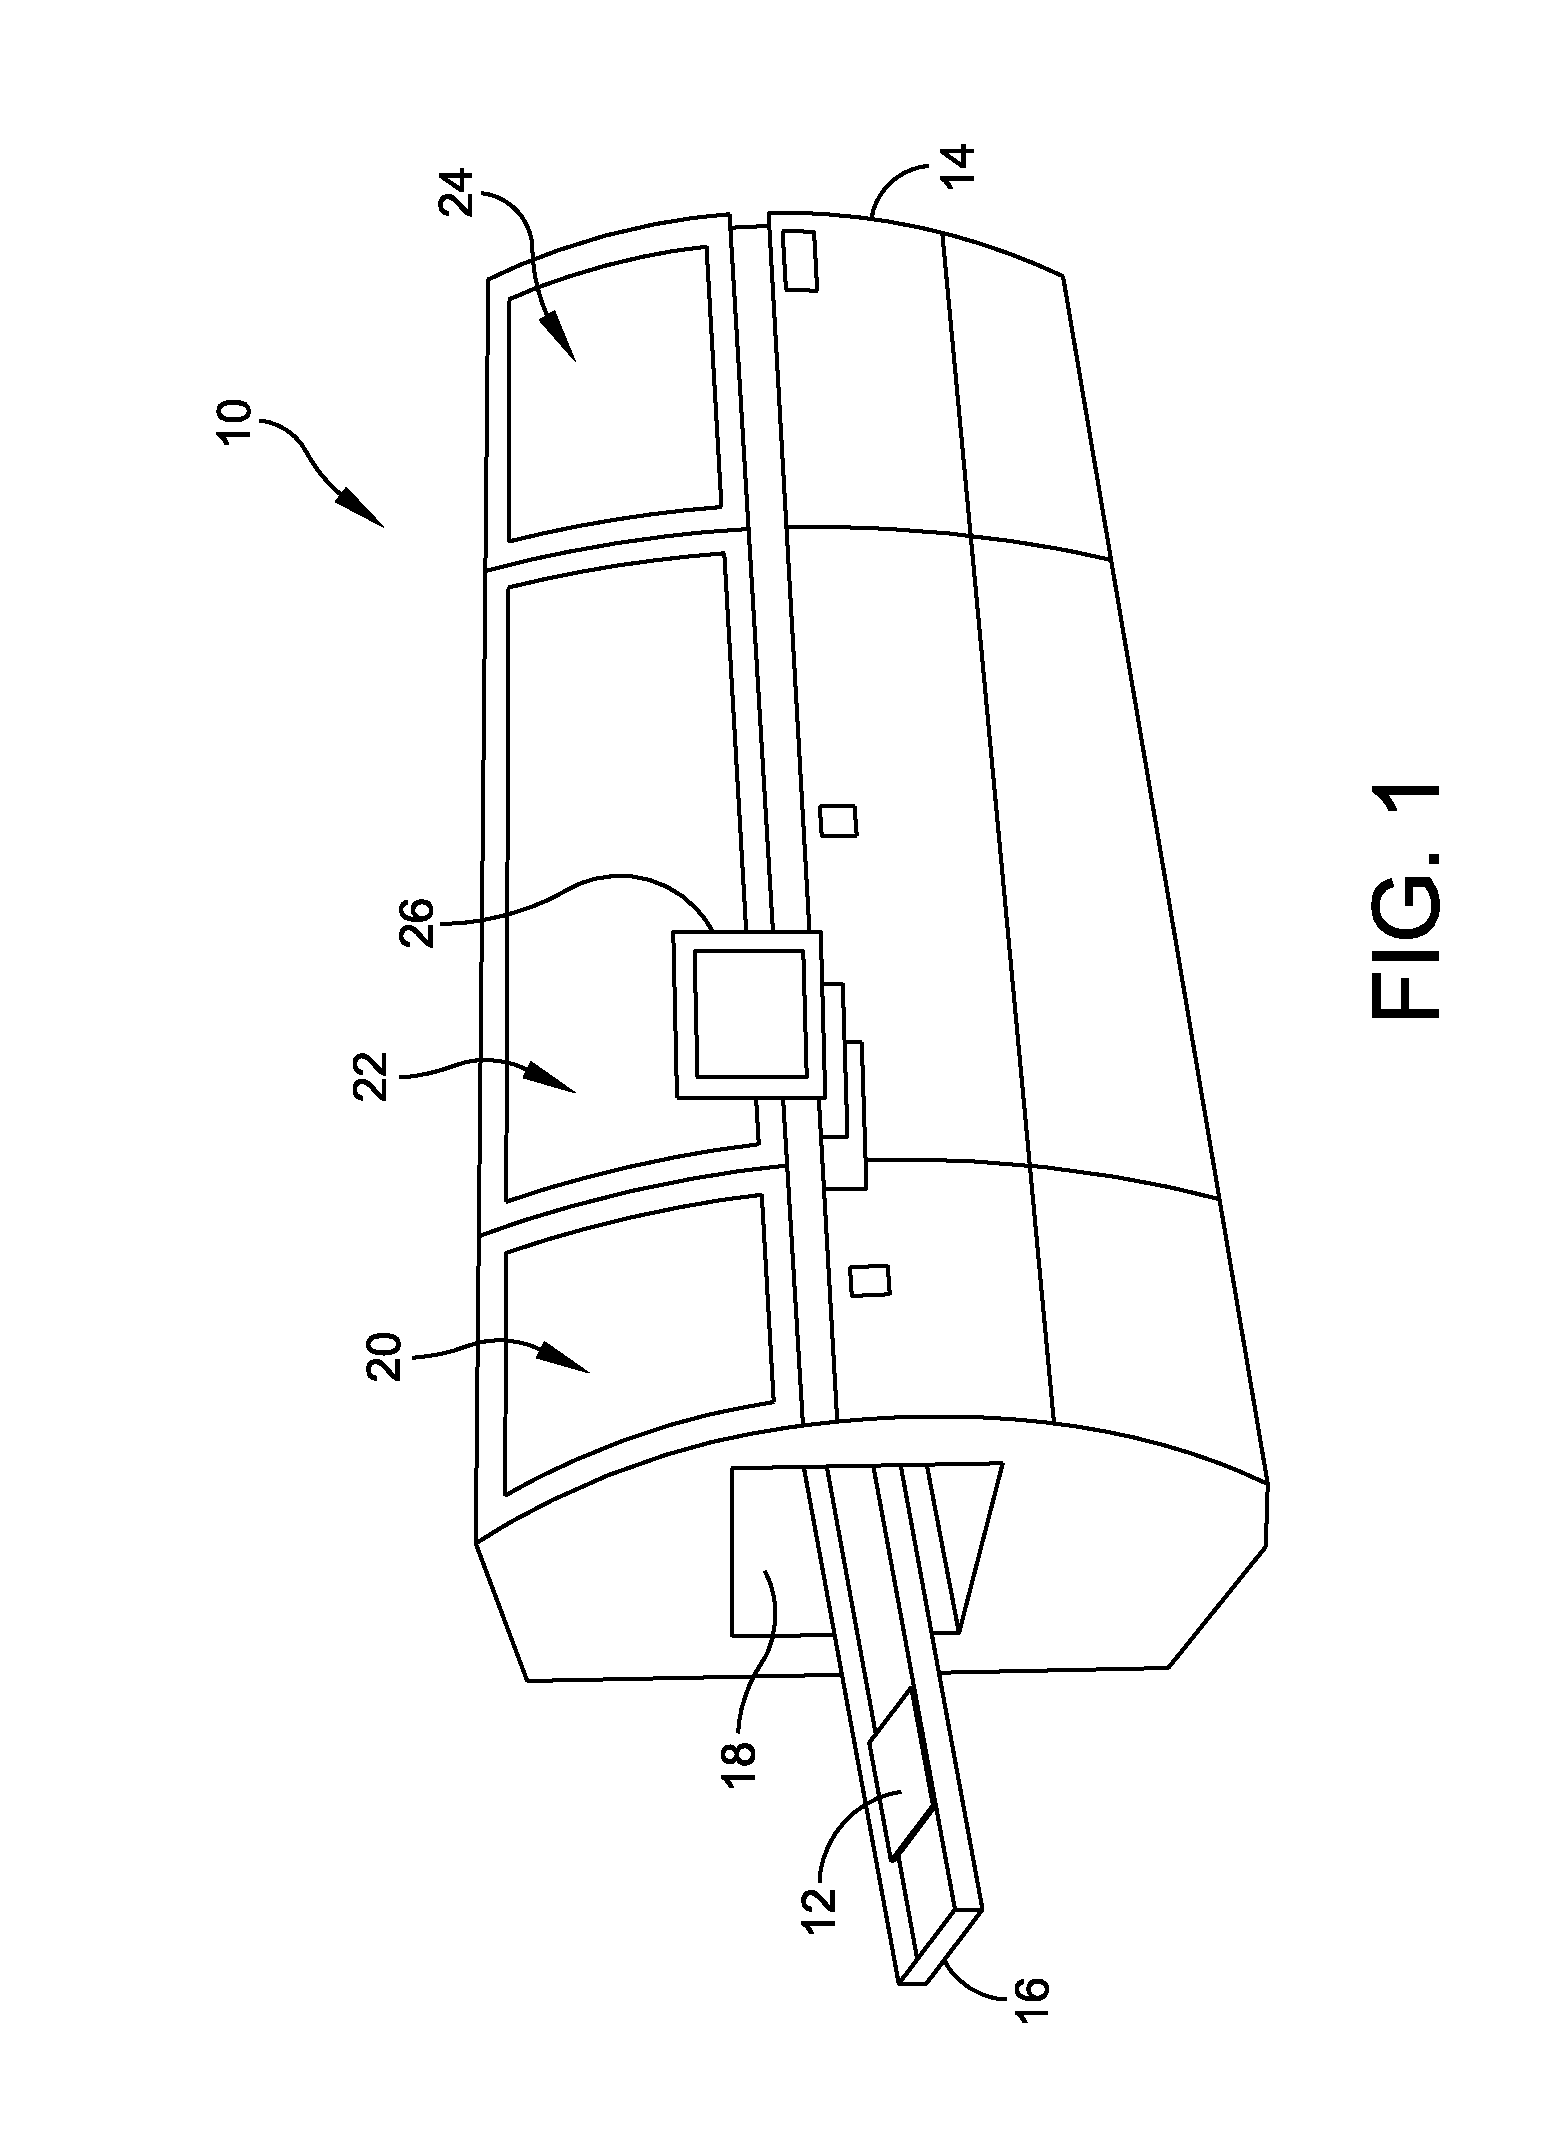 Pre-heater latch and seal mechanism for wave solder machine and related method